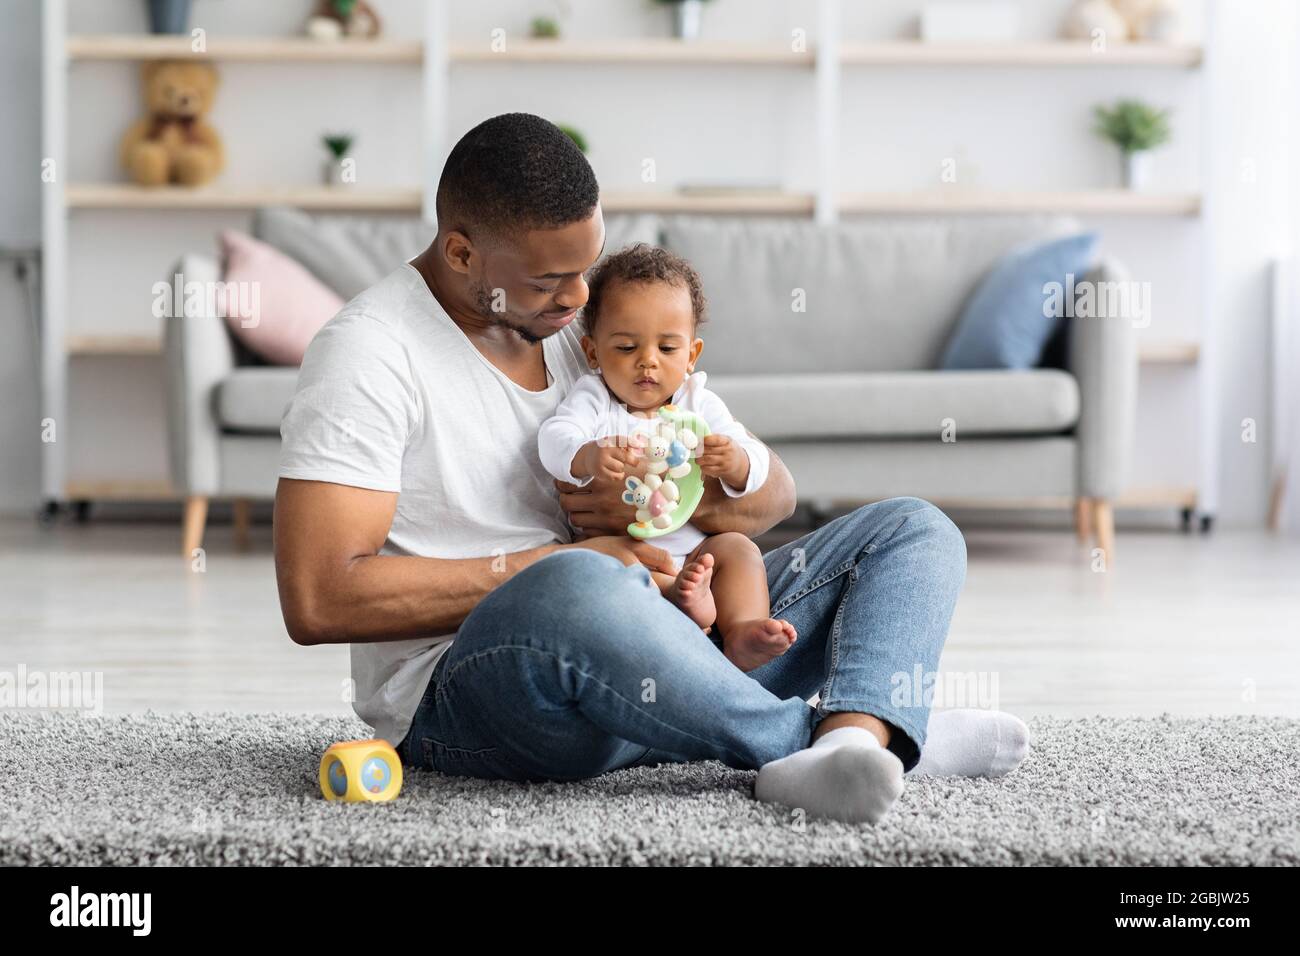 Fatherhood Concept. Happy Black Man Playing With Adorable Infant Child At Home Stock Photo